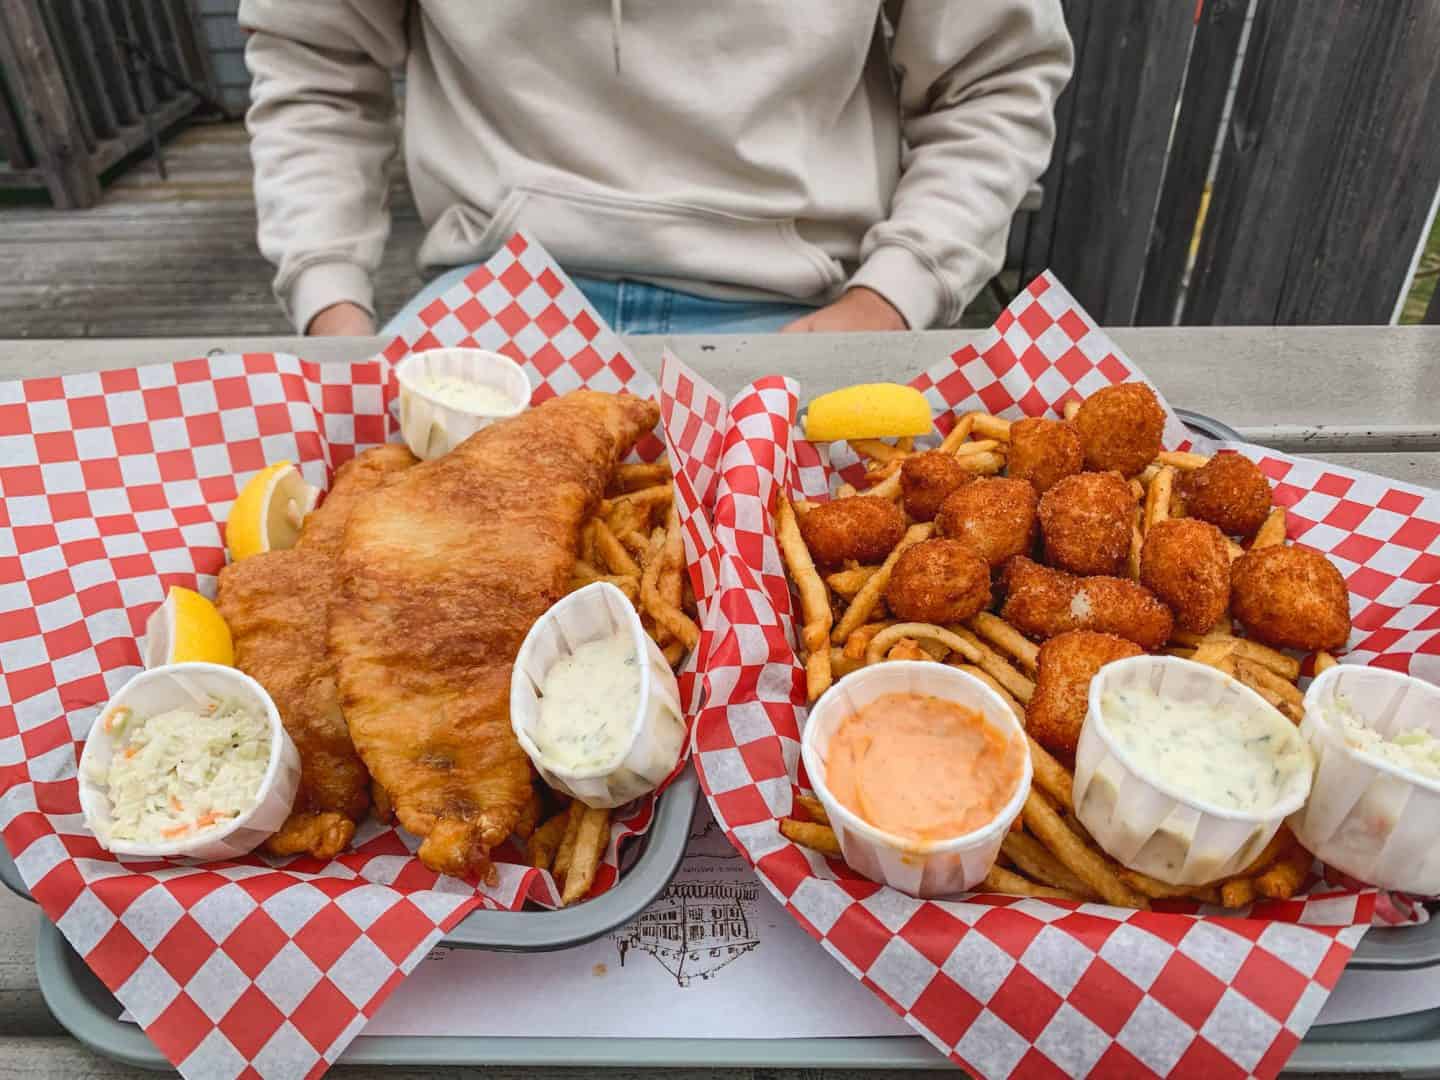 Halifax, Nova Scotia is filled with amazing seafood spots and delicious food. Here are the best restaurants to eat at in Nova Scotia, Canada!